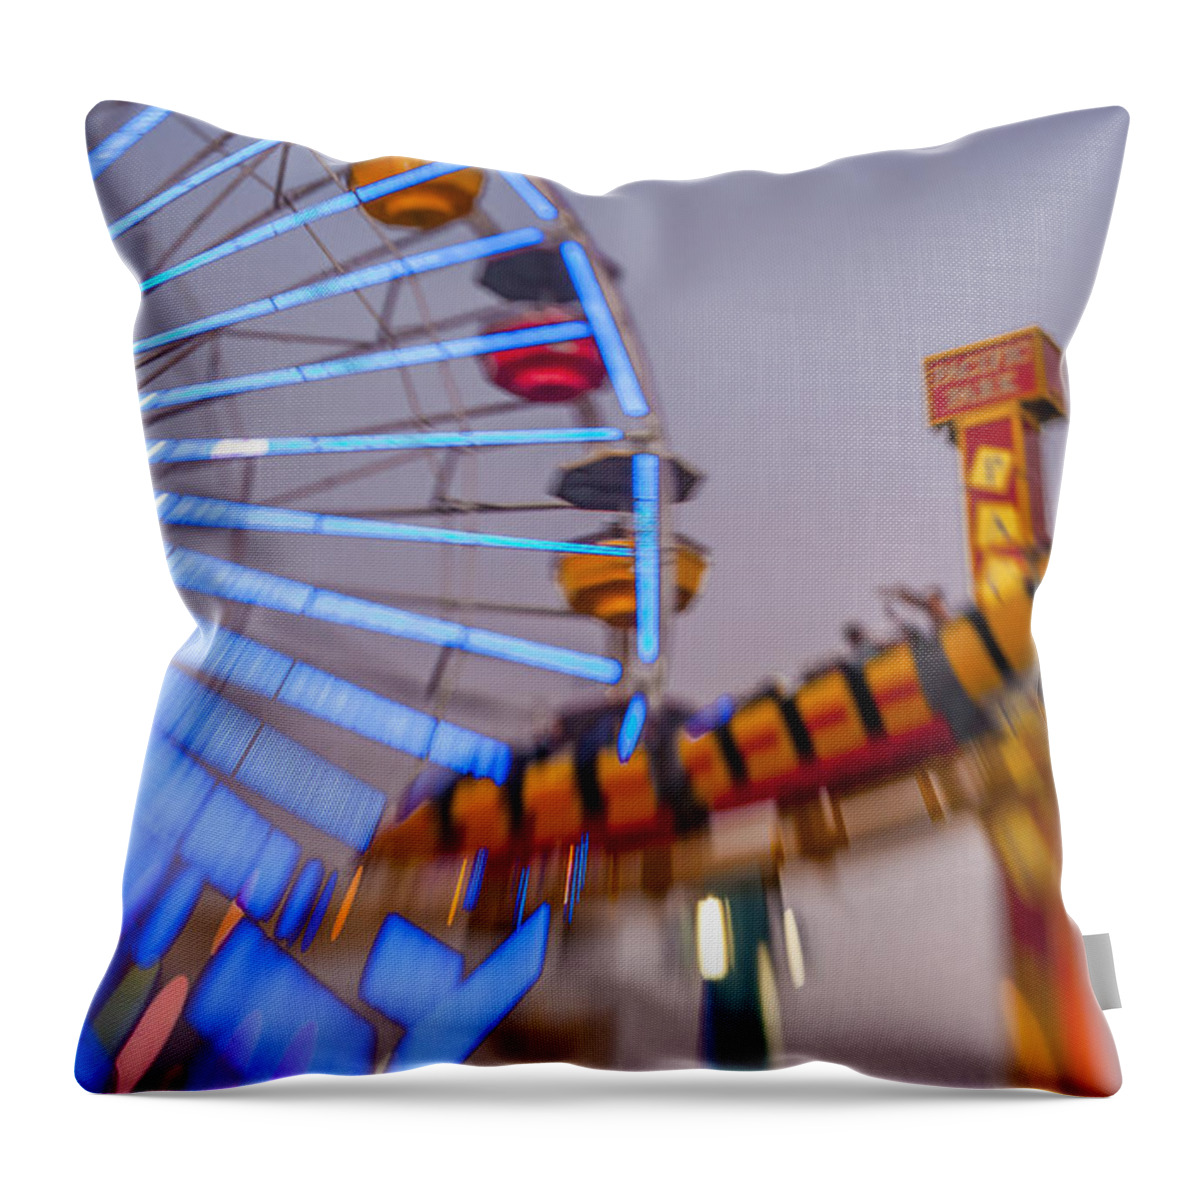 Carousel Throw Pillow featuring the photograph Now I know it was a dream Santa Monica Ferris Wheel by Scott Campbell